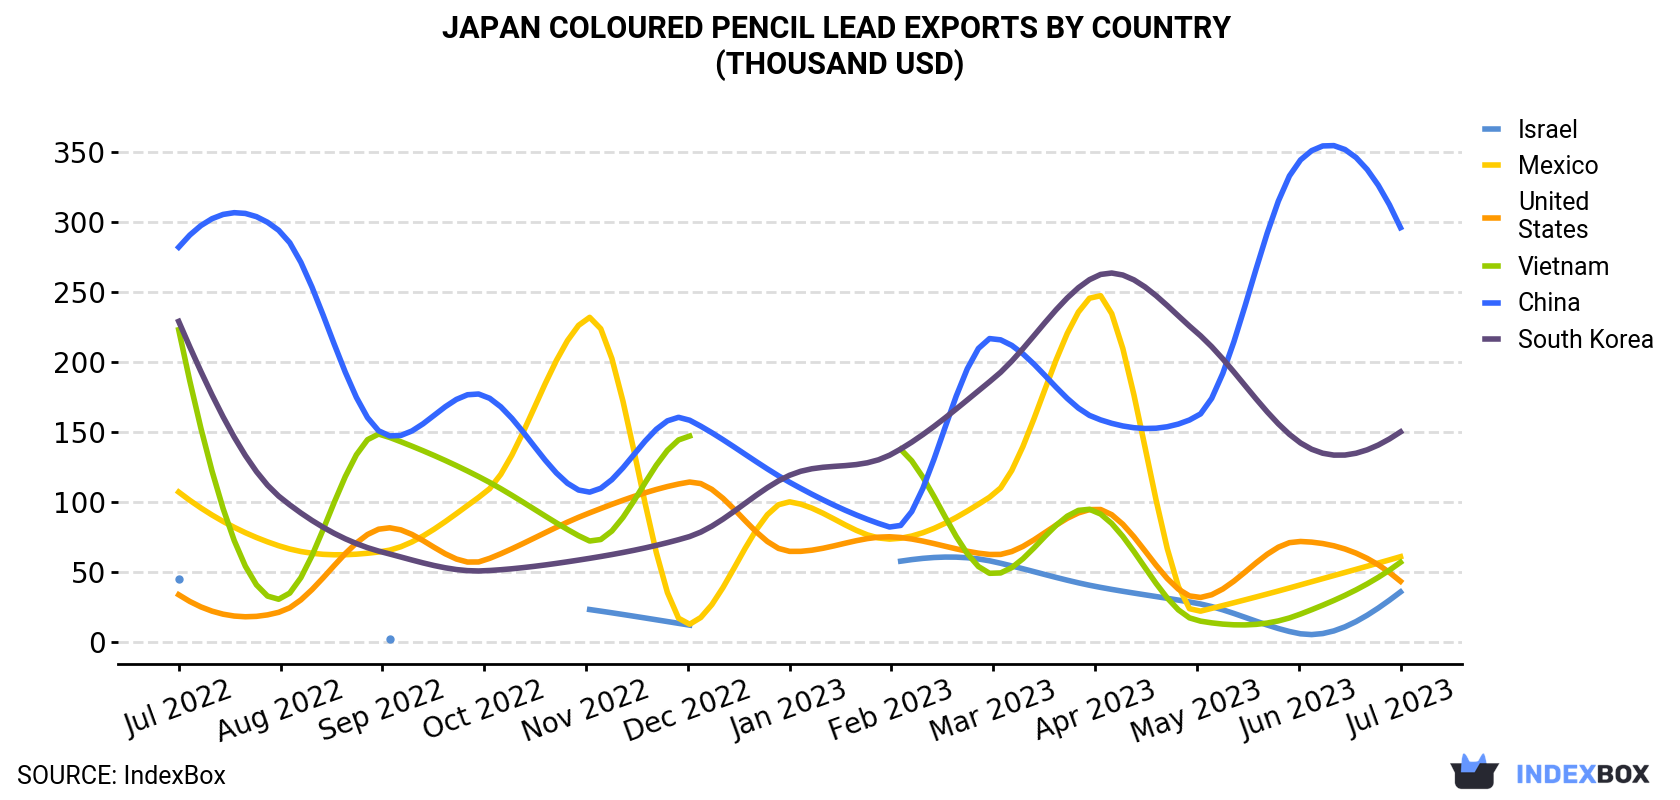 Japan Coloured Pencil Lead Exports By Country (Thousand USD)